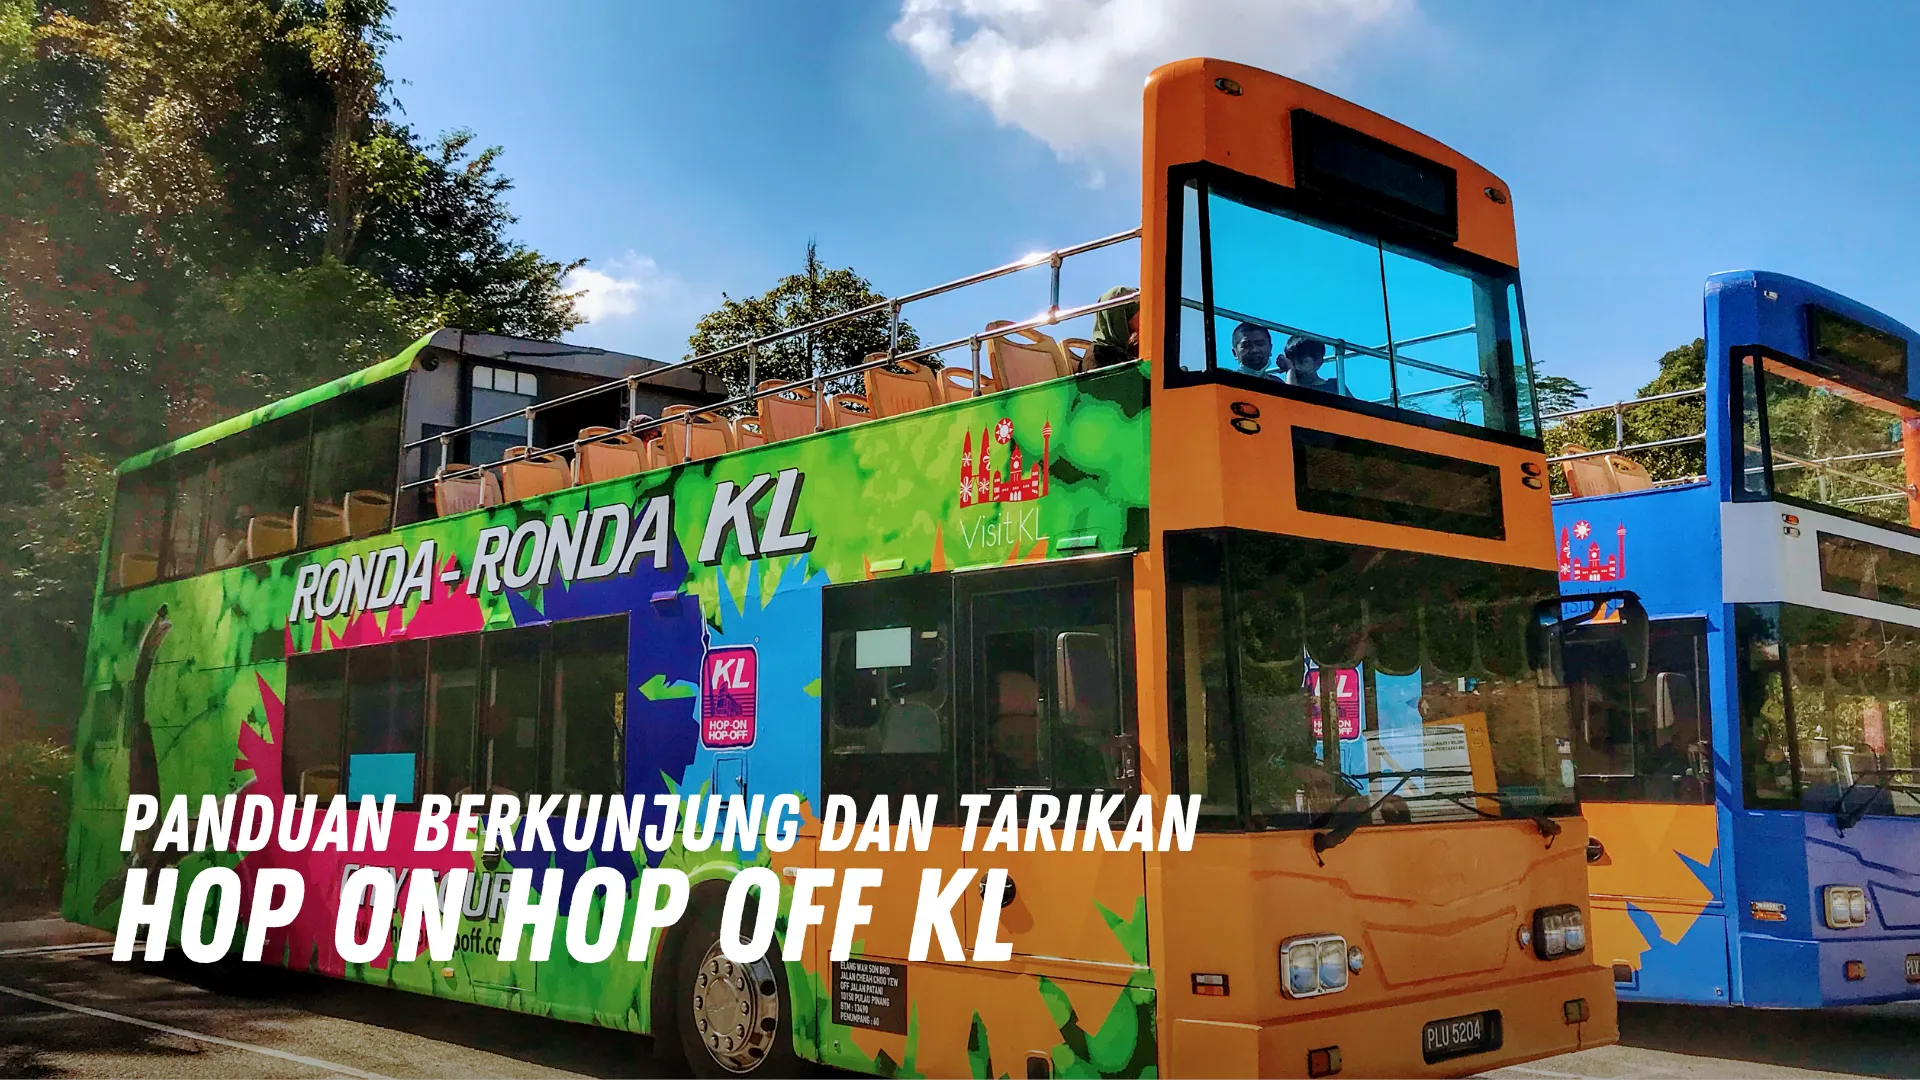 Review Hop On Hop Off KL Malaysia